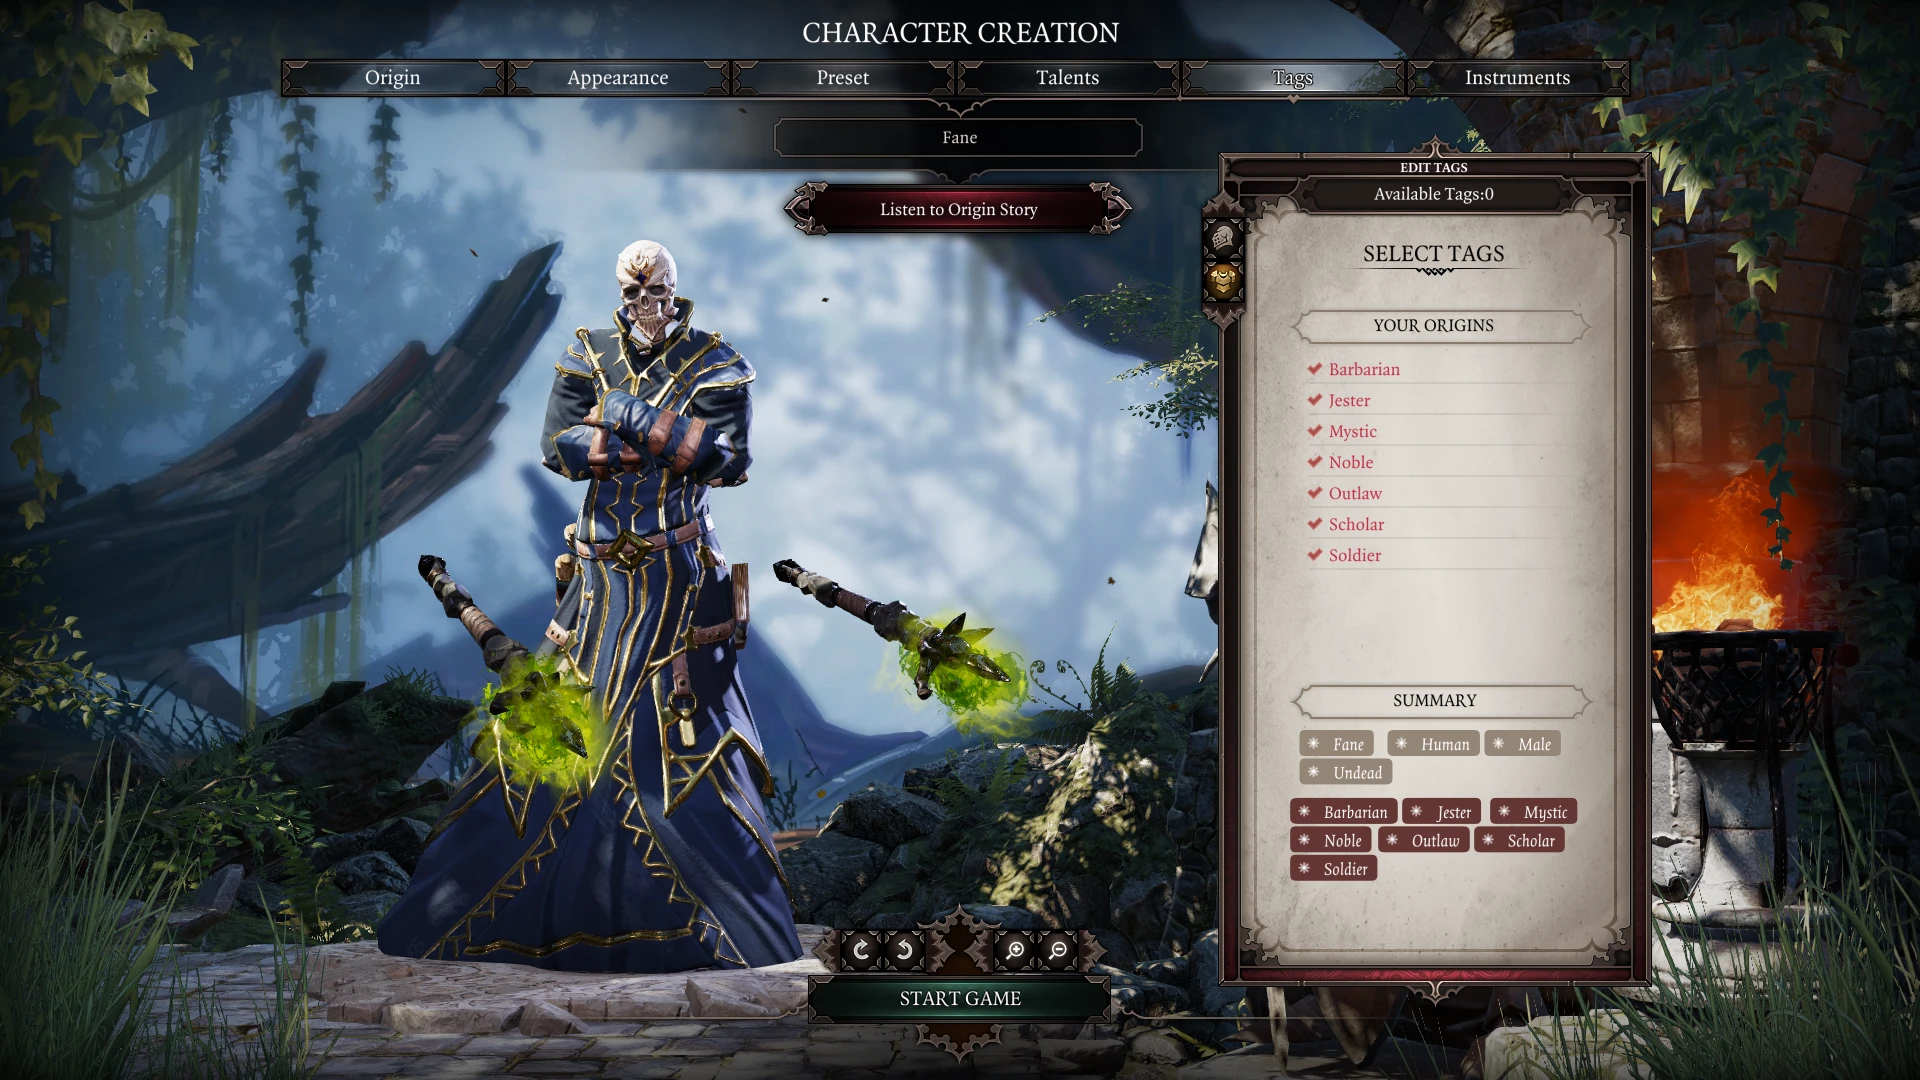 divinity original sin 2 mods require a new save